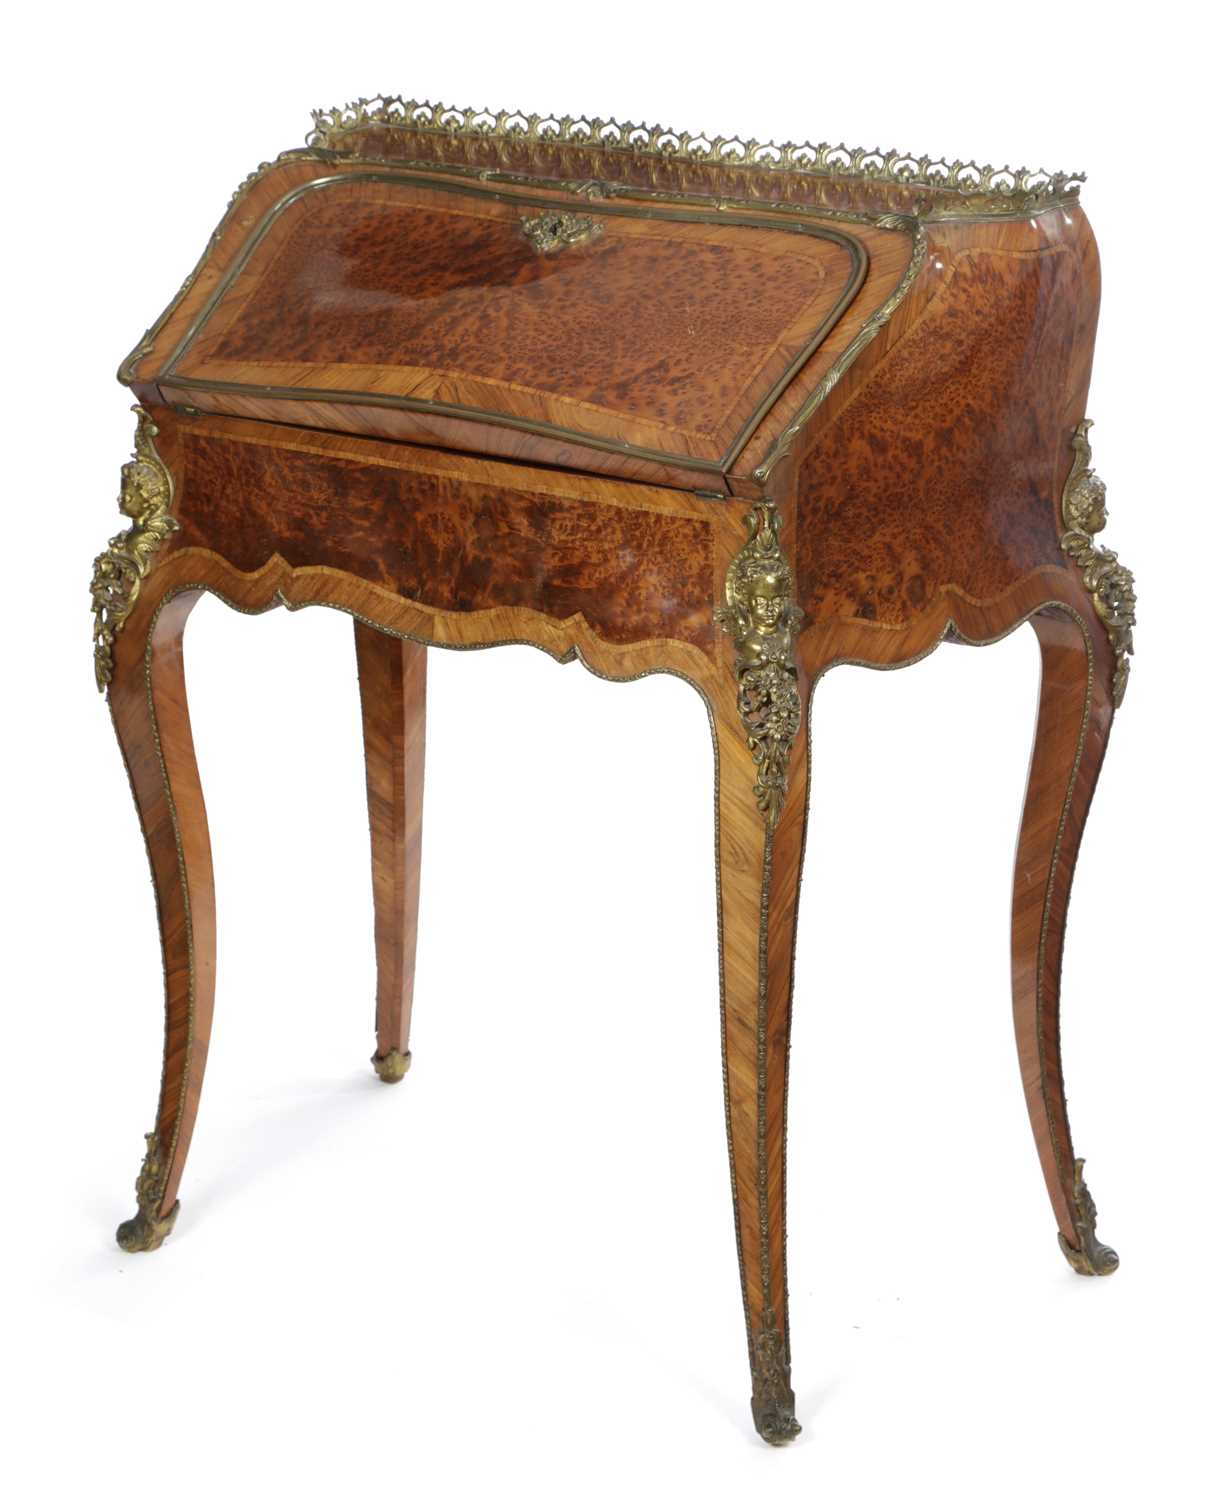 A FRENCH KINGWOOD AND THUYA BUREAU DE DAME IN LOUIS XV STYLE, LATE 19TH CENTURY of bombe shape